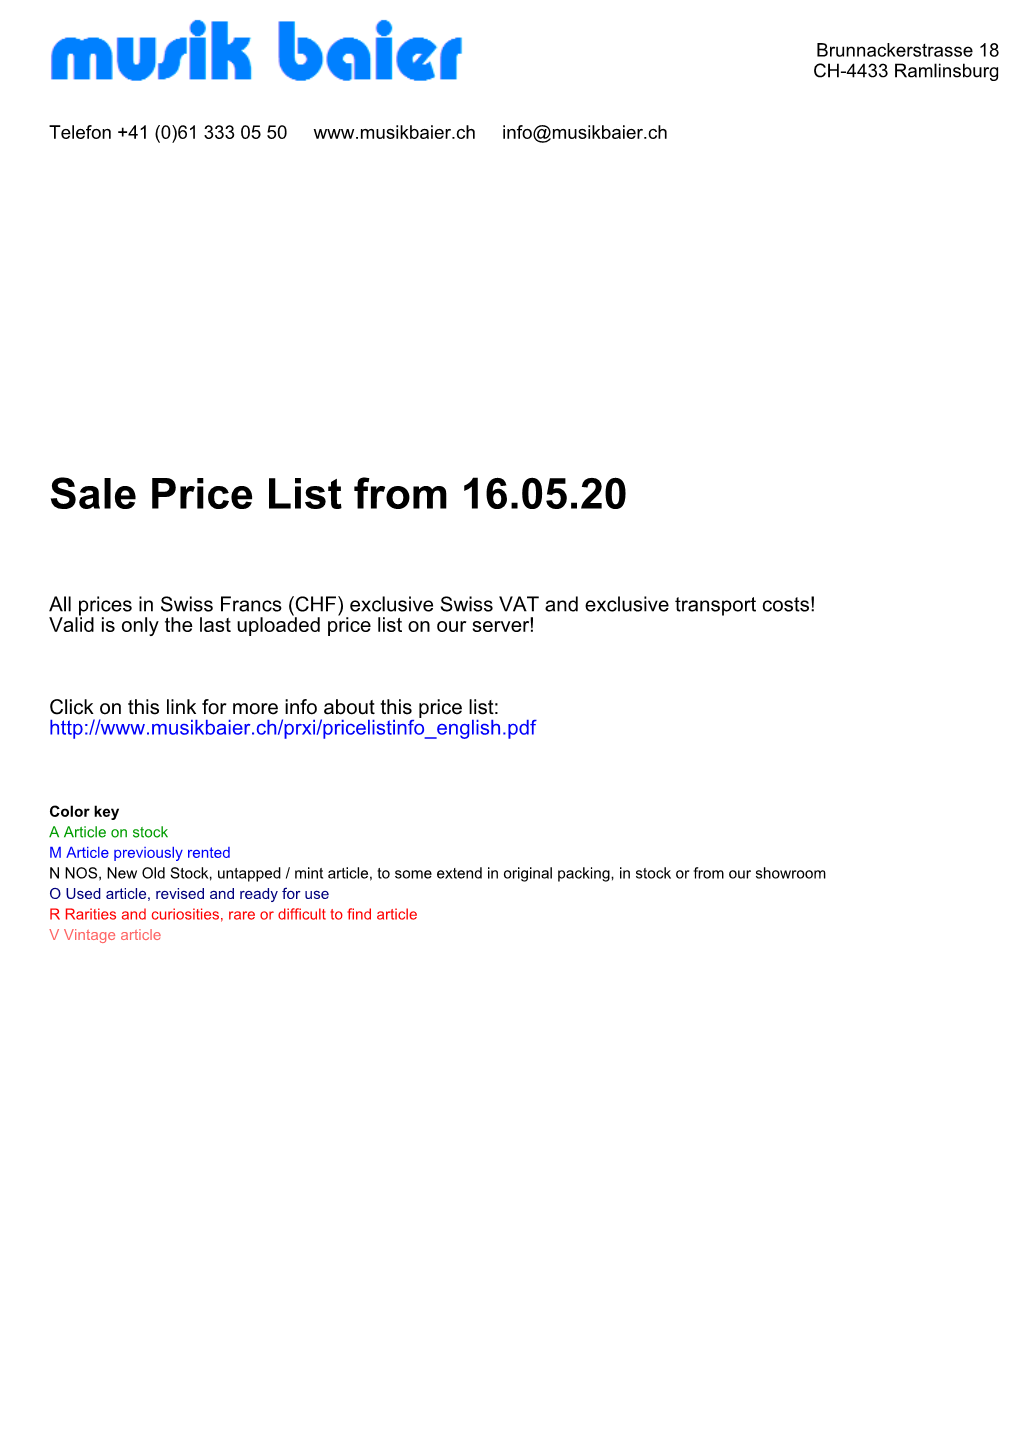 Sale Price List from 16.05.20